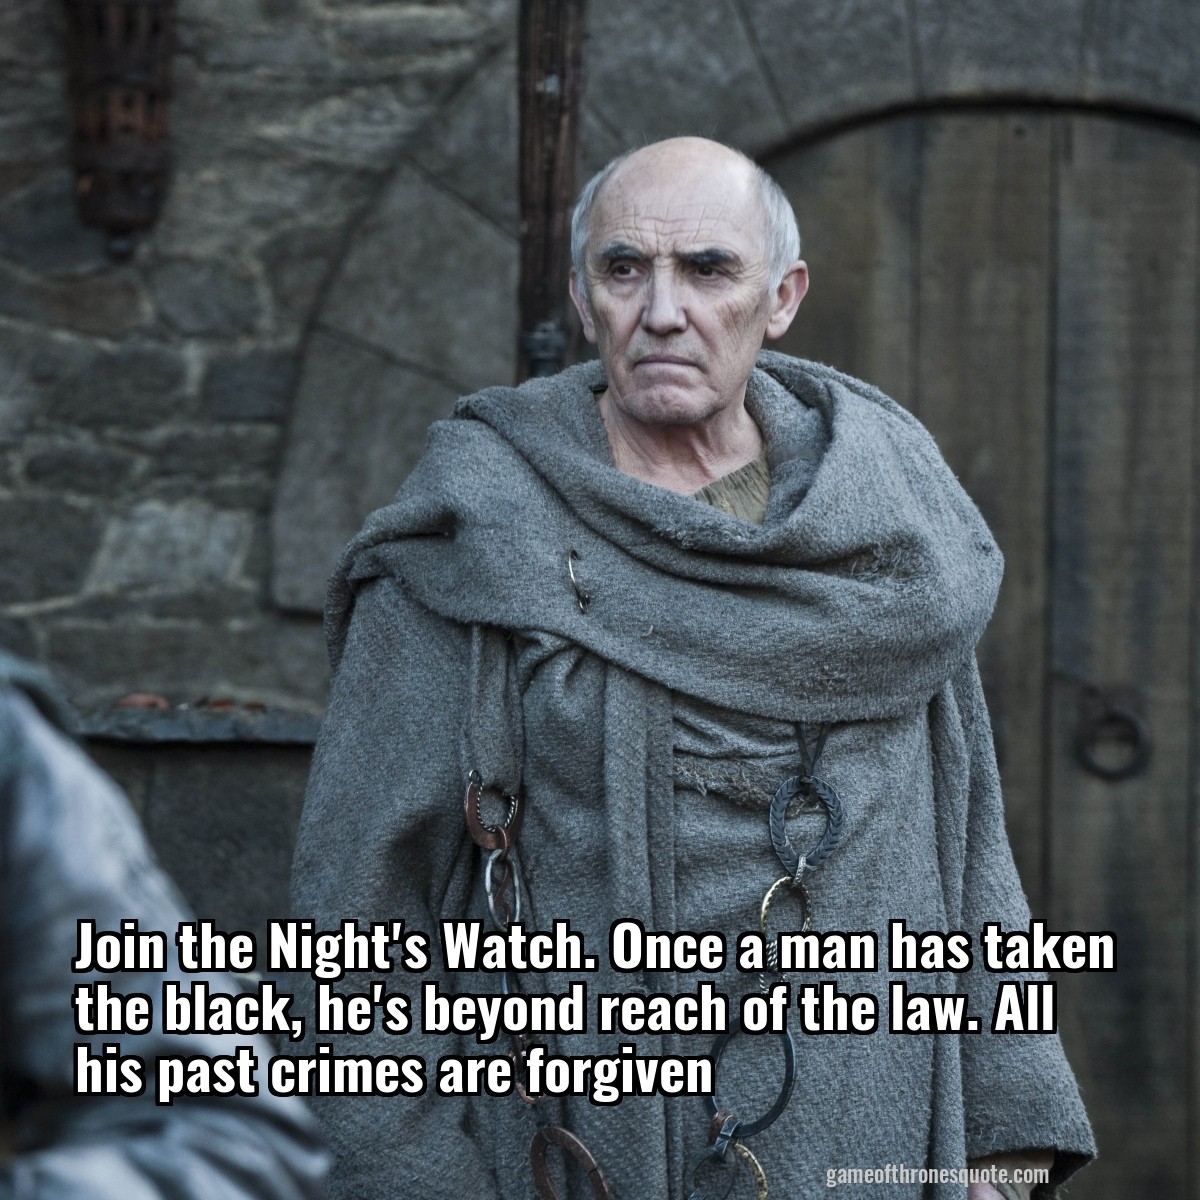 Join the Night's Watch. Once a man has taken the black, he's beyond reach of the law. All his past crimes are forgiven